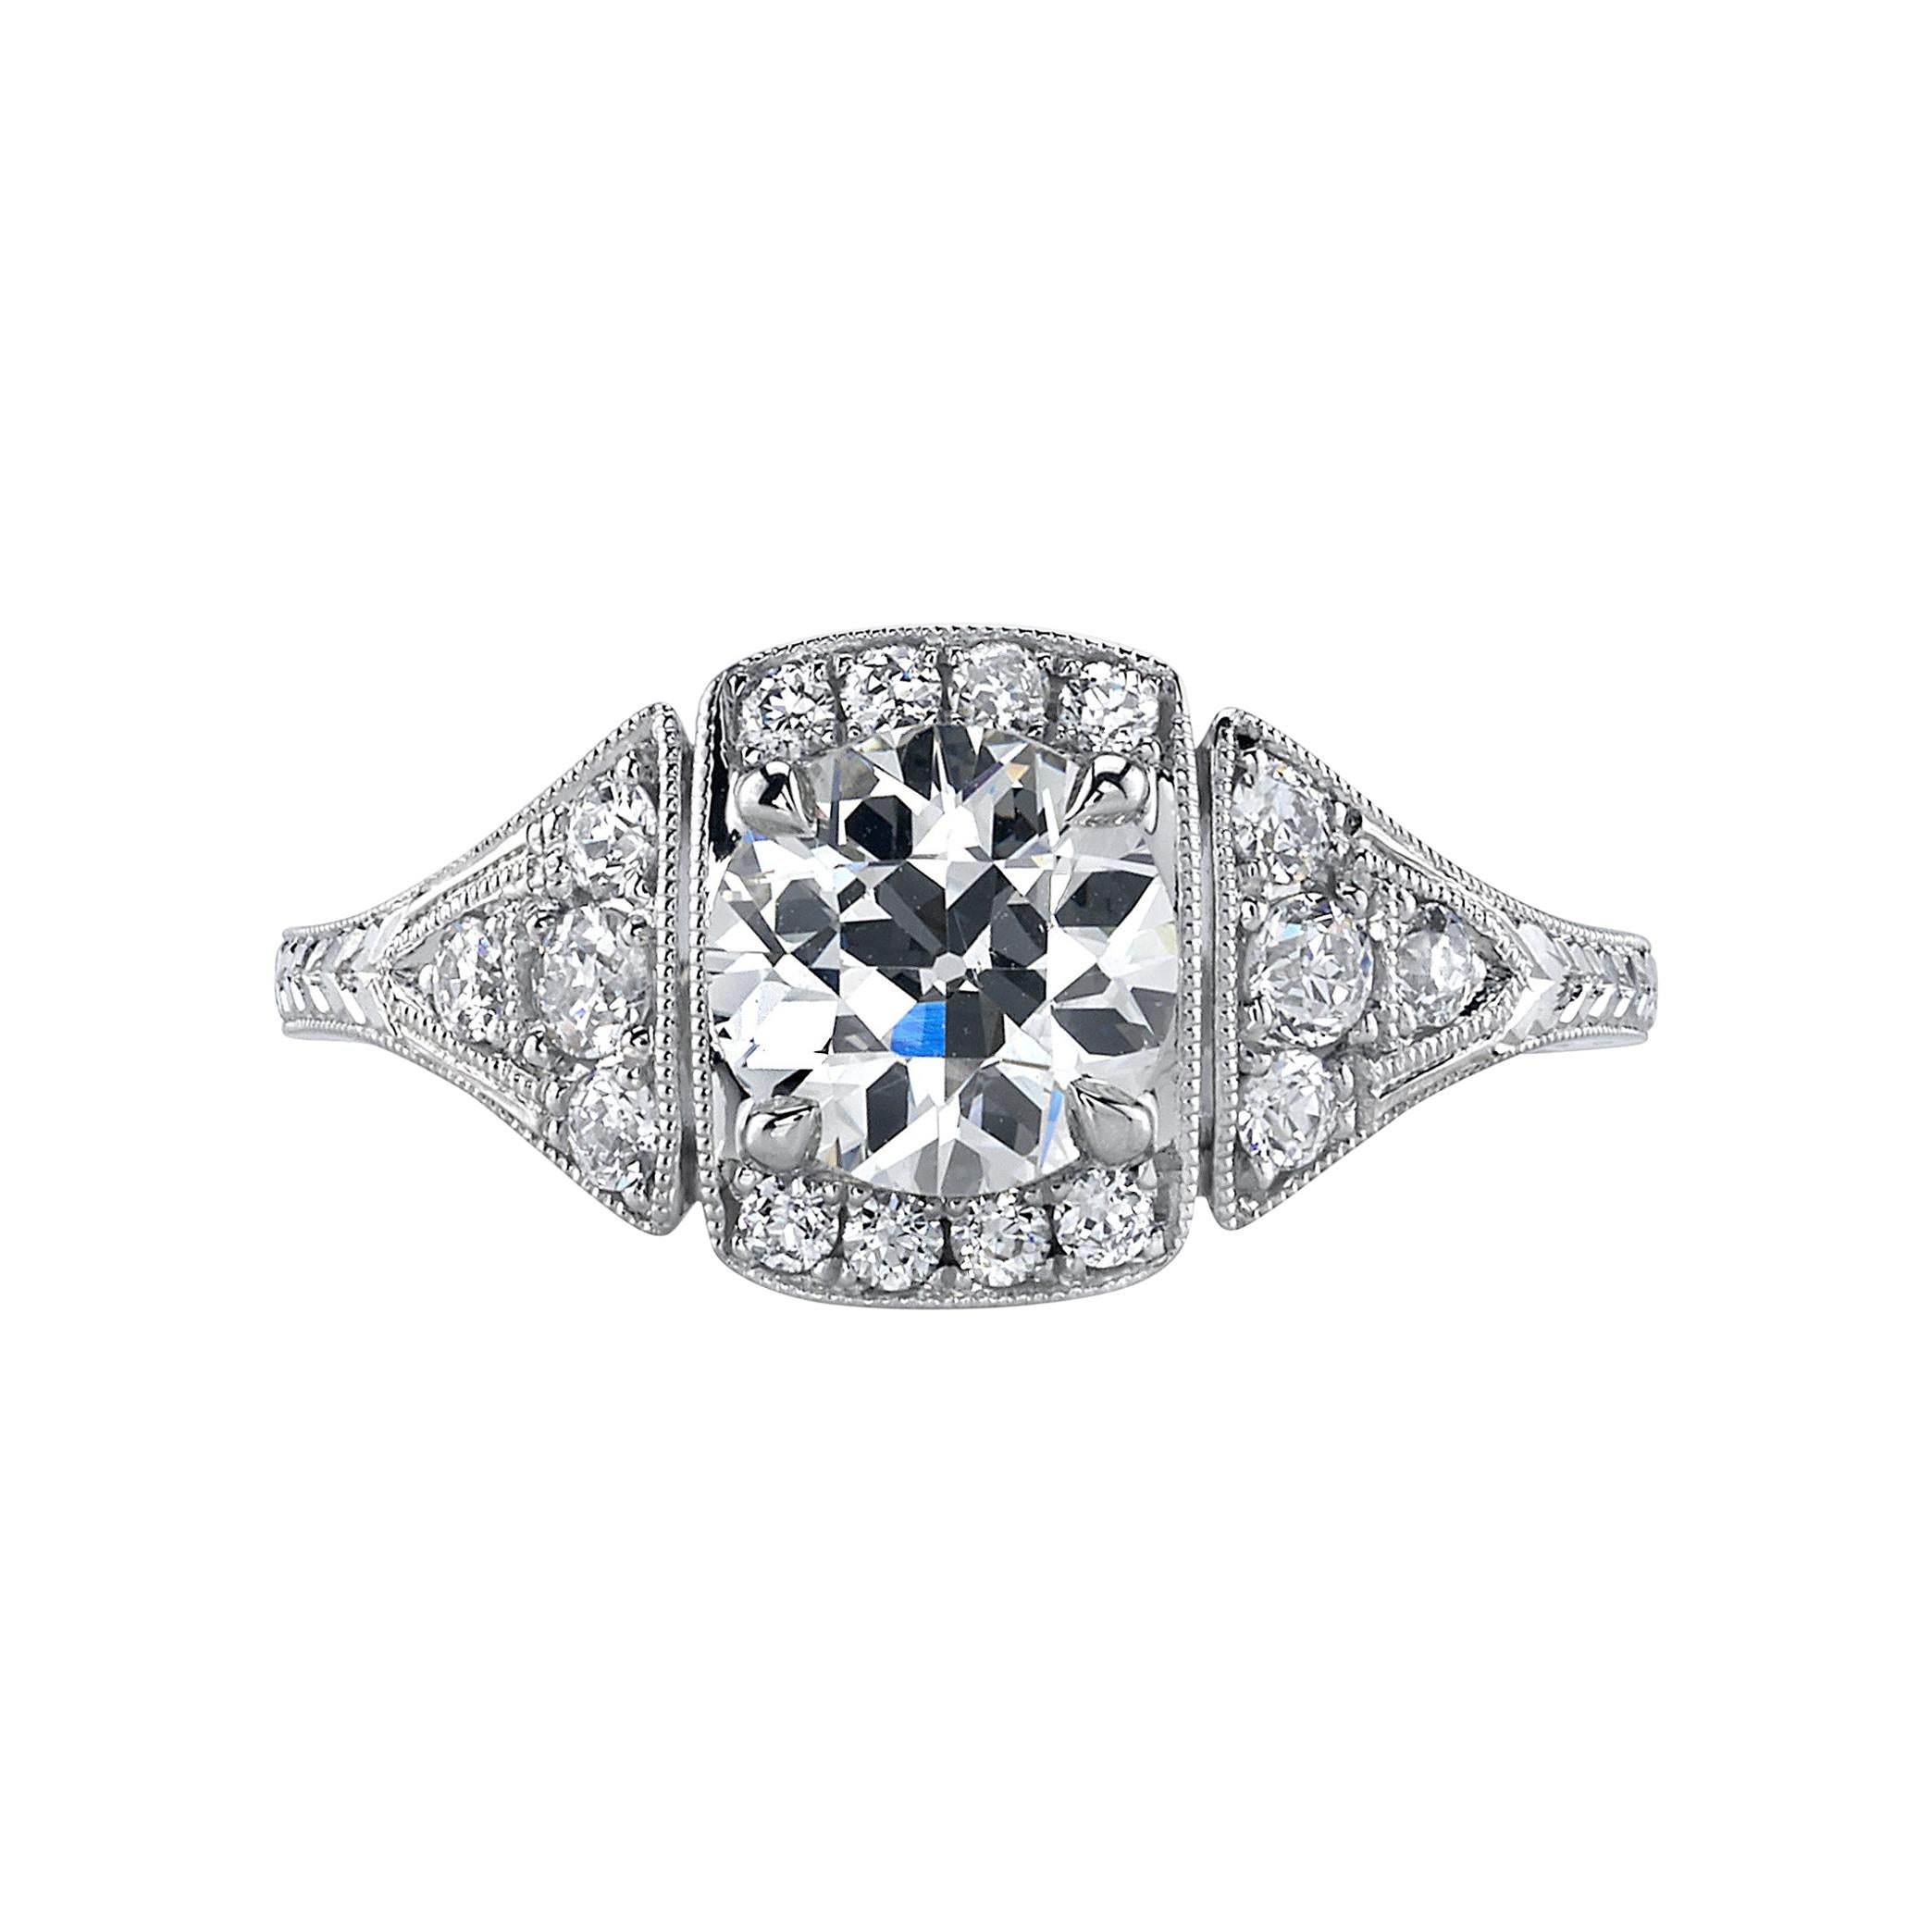 1.09 Carat Old European Cut Diamond Set in a Handcrafted Platinum Ring